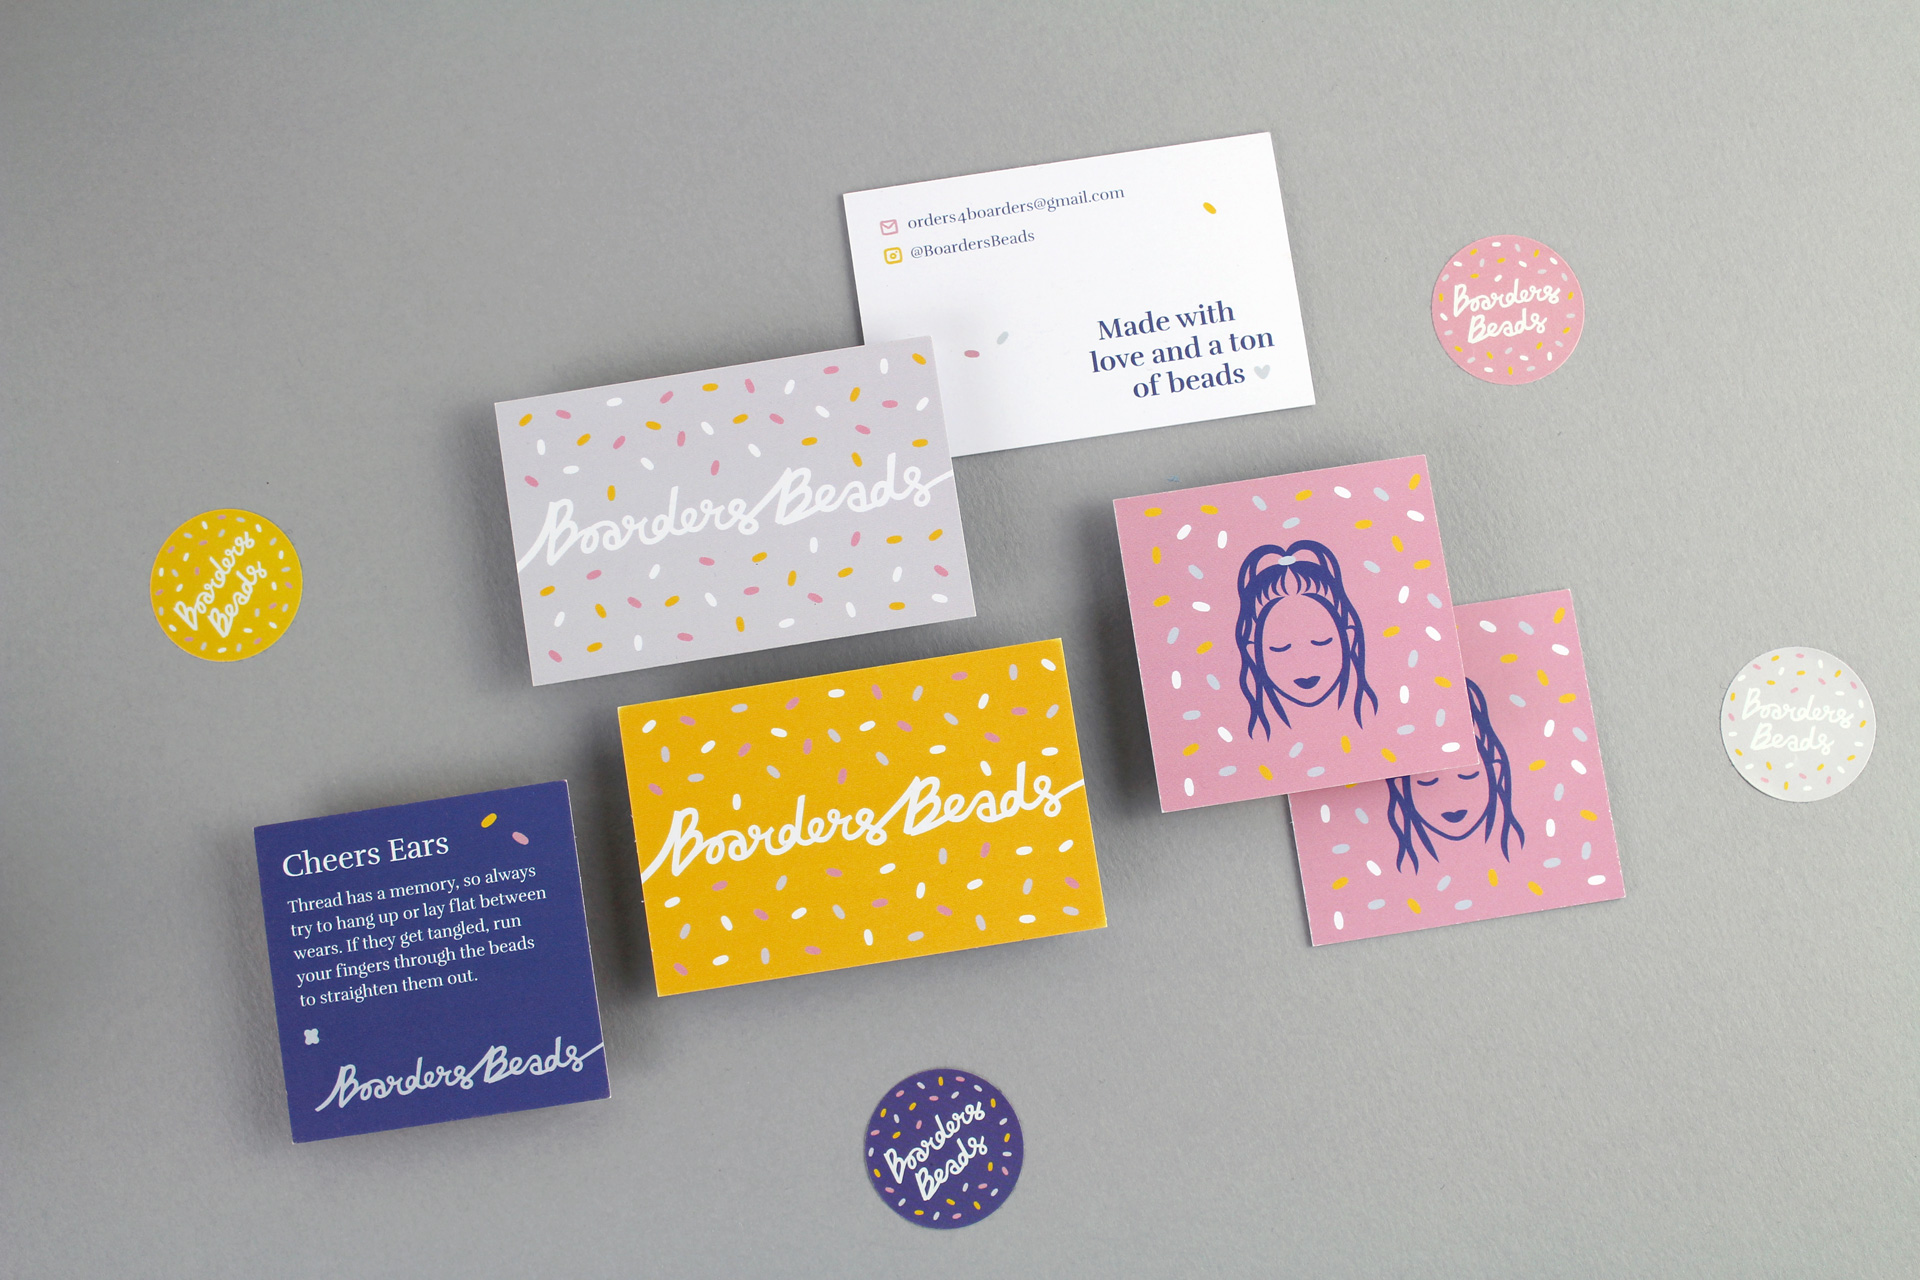 Brand stationery and identity for Boarders Beads